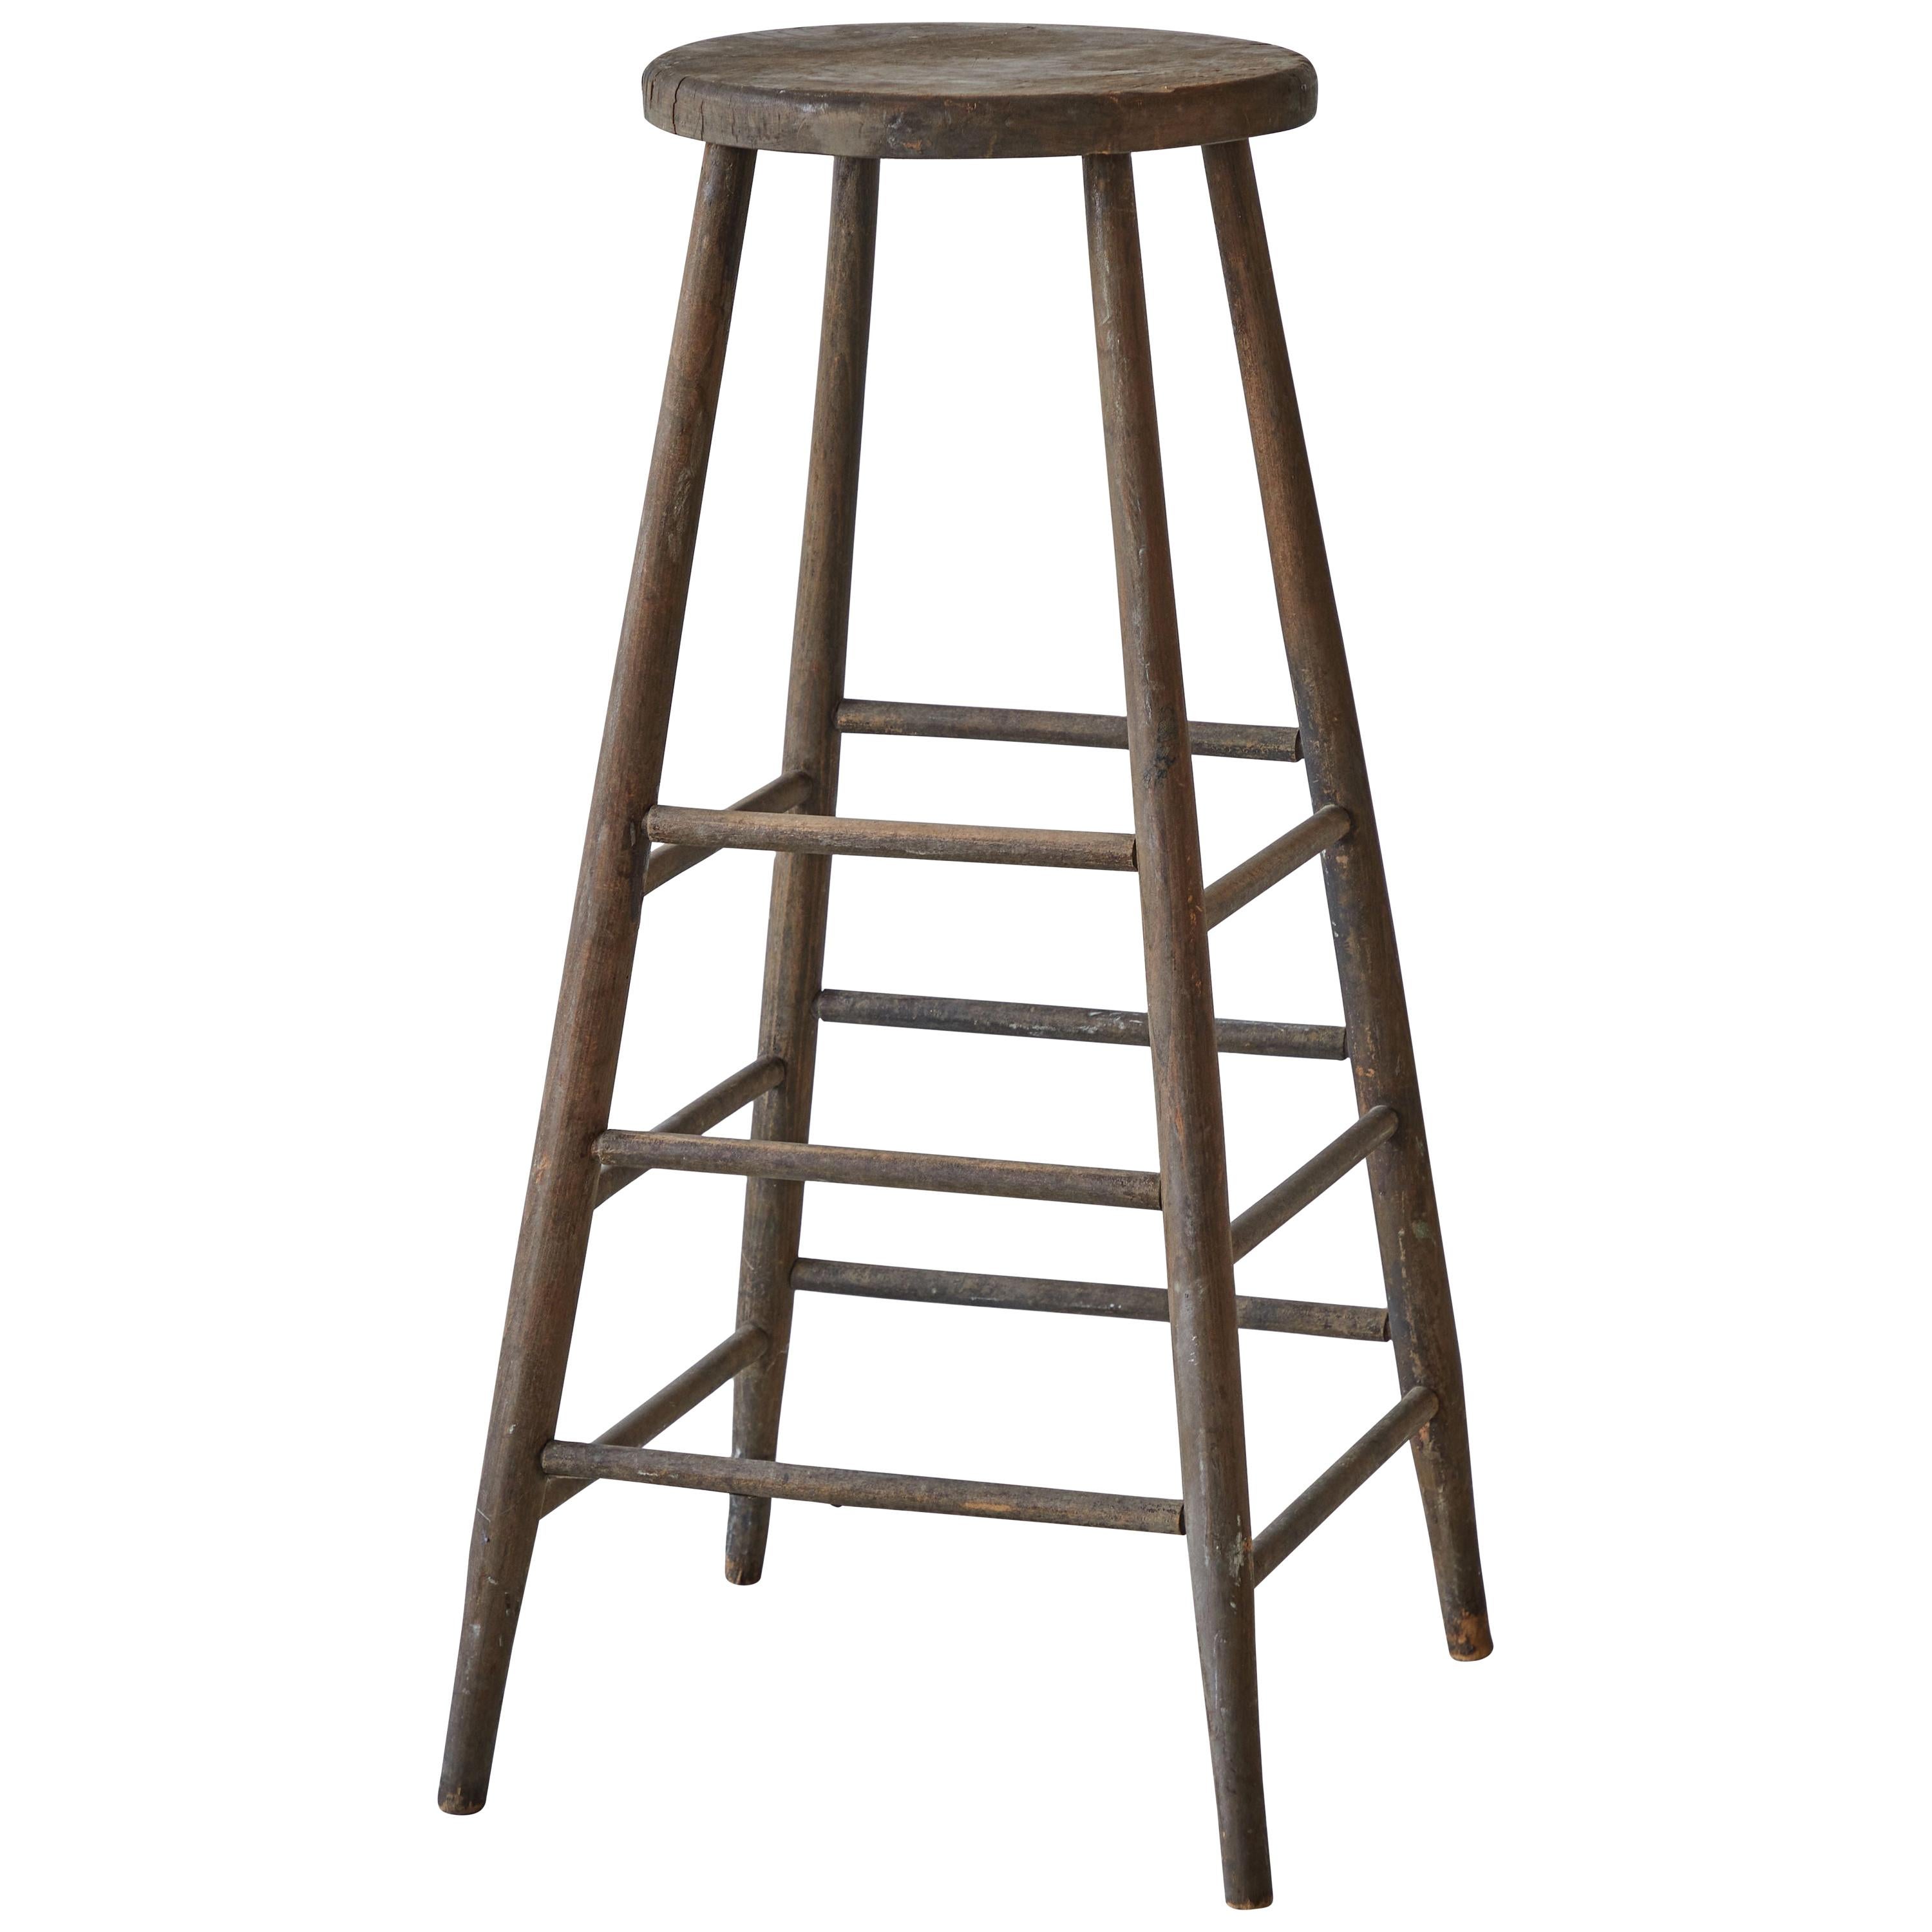 Early American Rustic Tall Stool